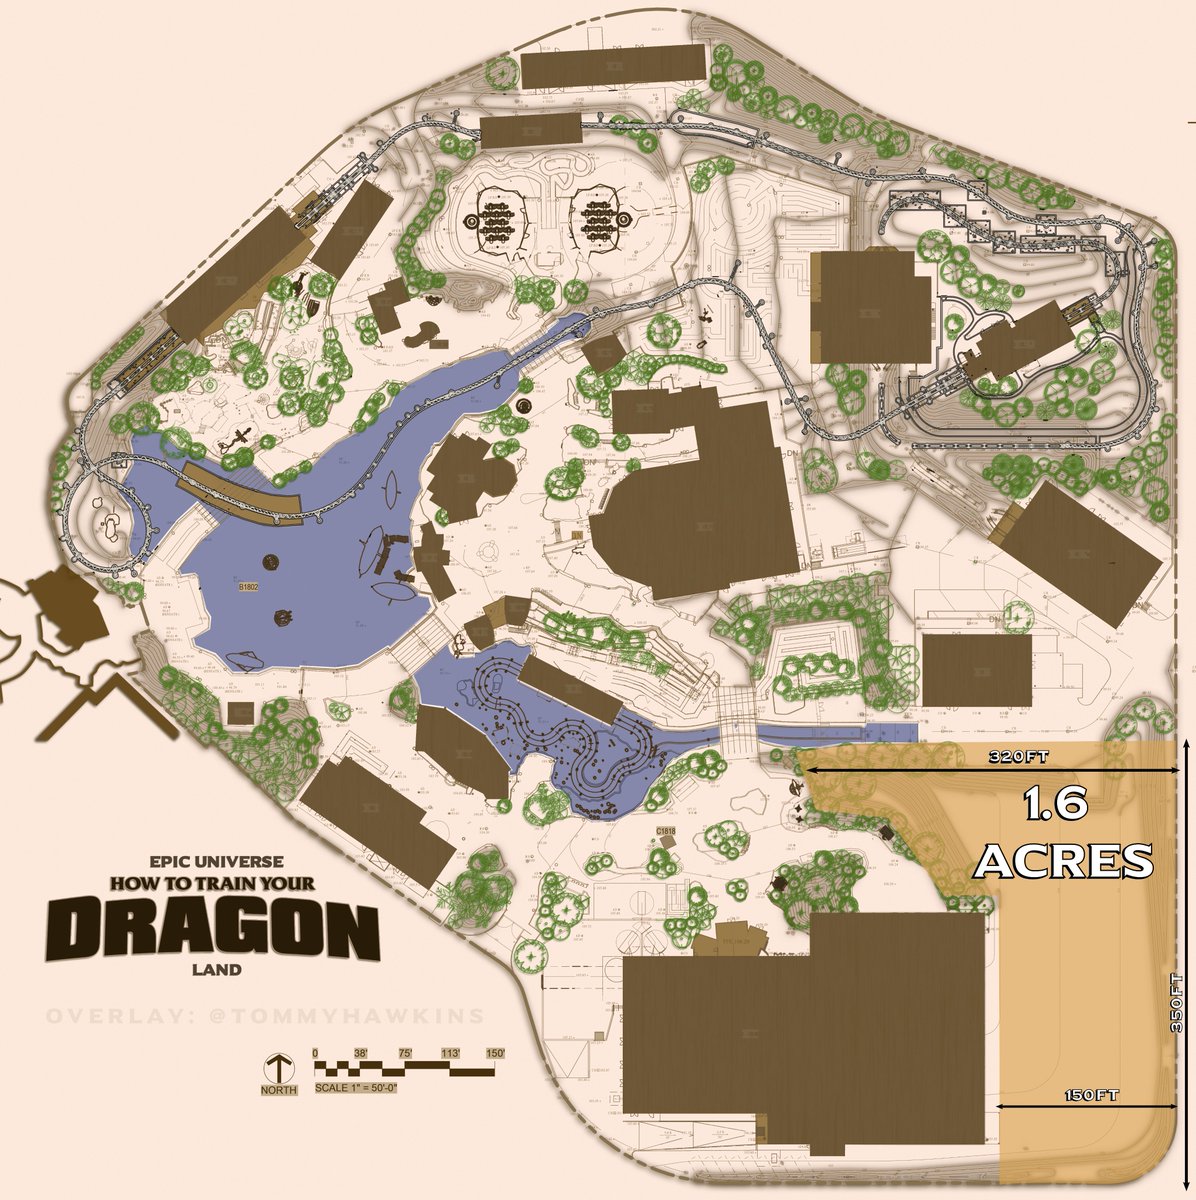 The final most exciting point of analysis in HTTYD land, that i thought would be completed from day 1, is the grading plan shows an approx 1.6acre area of flat unused space available to expand. its about the area of Mummy show building.  #EpicUniverse